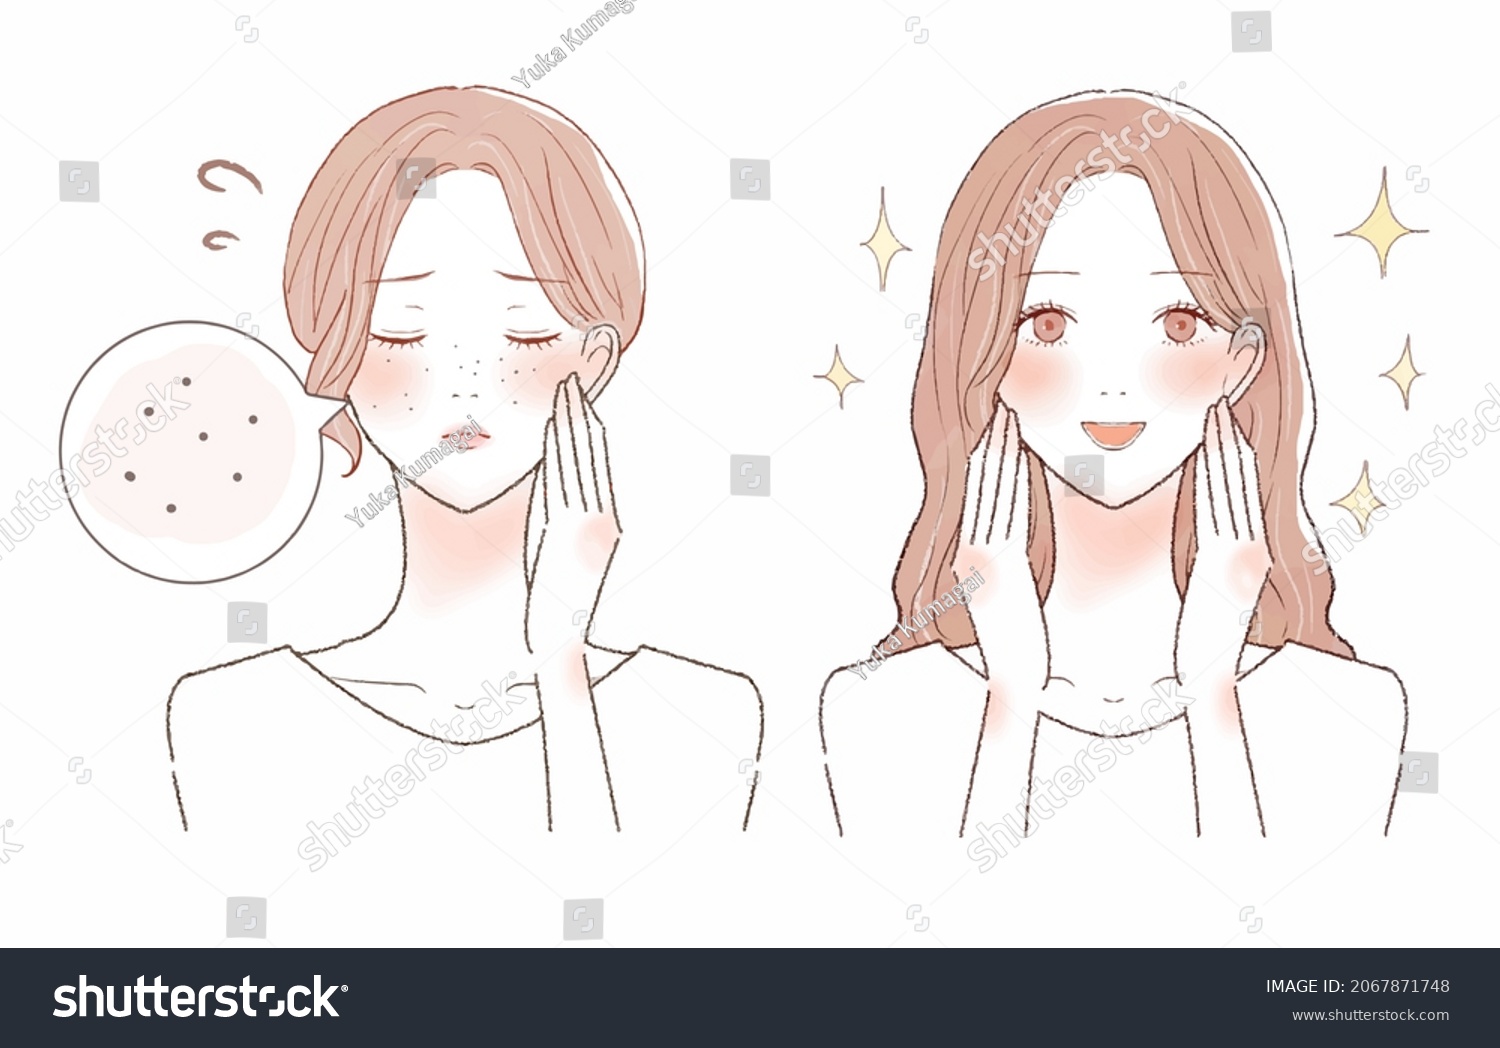 SVG of Before and after of women suffering from darkening pores. On white background. svg